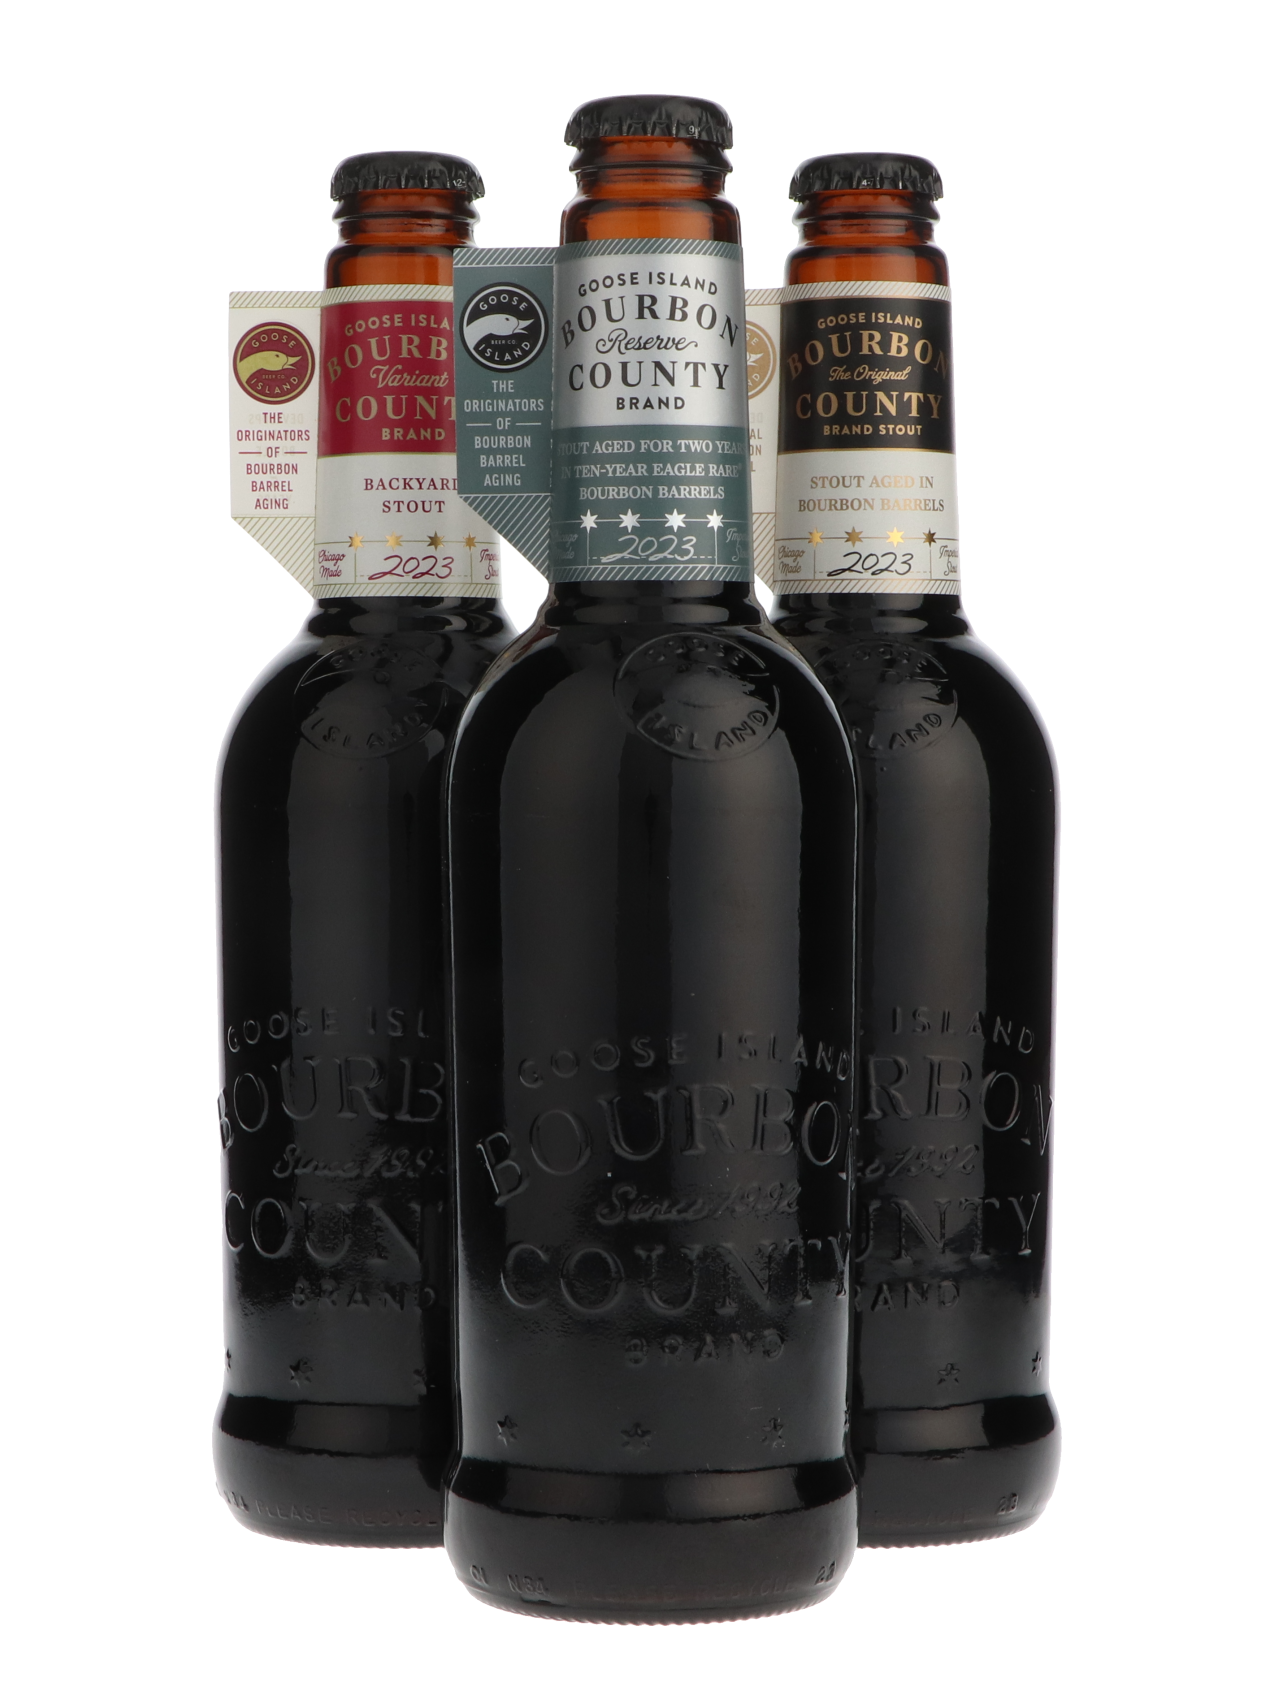 -Goose Island- BCBS Eagle Rare 2-Year Reserve, BCBS Backyard & BCBS 2023 14.6% Pack-Packs & Cases- Only @ Beer Republic - The best online beer store for American & Canadian craft beer - Buy beer online from the USA and Canada - Bier online kopen - Amerikaans bier kopen - Craft beer store - Craft beer kopen - Amerikanisch bier kaufen - Bier online kaufen - Acheter biere online - IPA - Stout - Porter - New England IPA - Hazy IPA - Imperial Stout - Barrel Aged - Barrel Aged Imperial Stout - Brown - Dark beer -